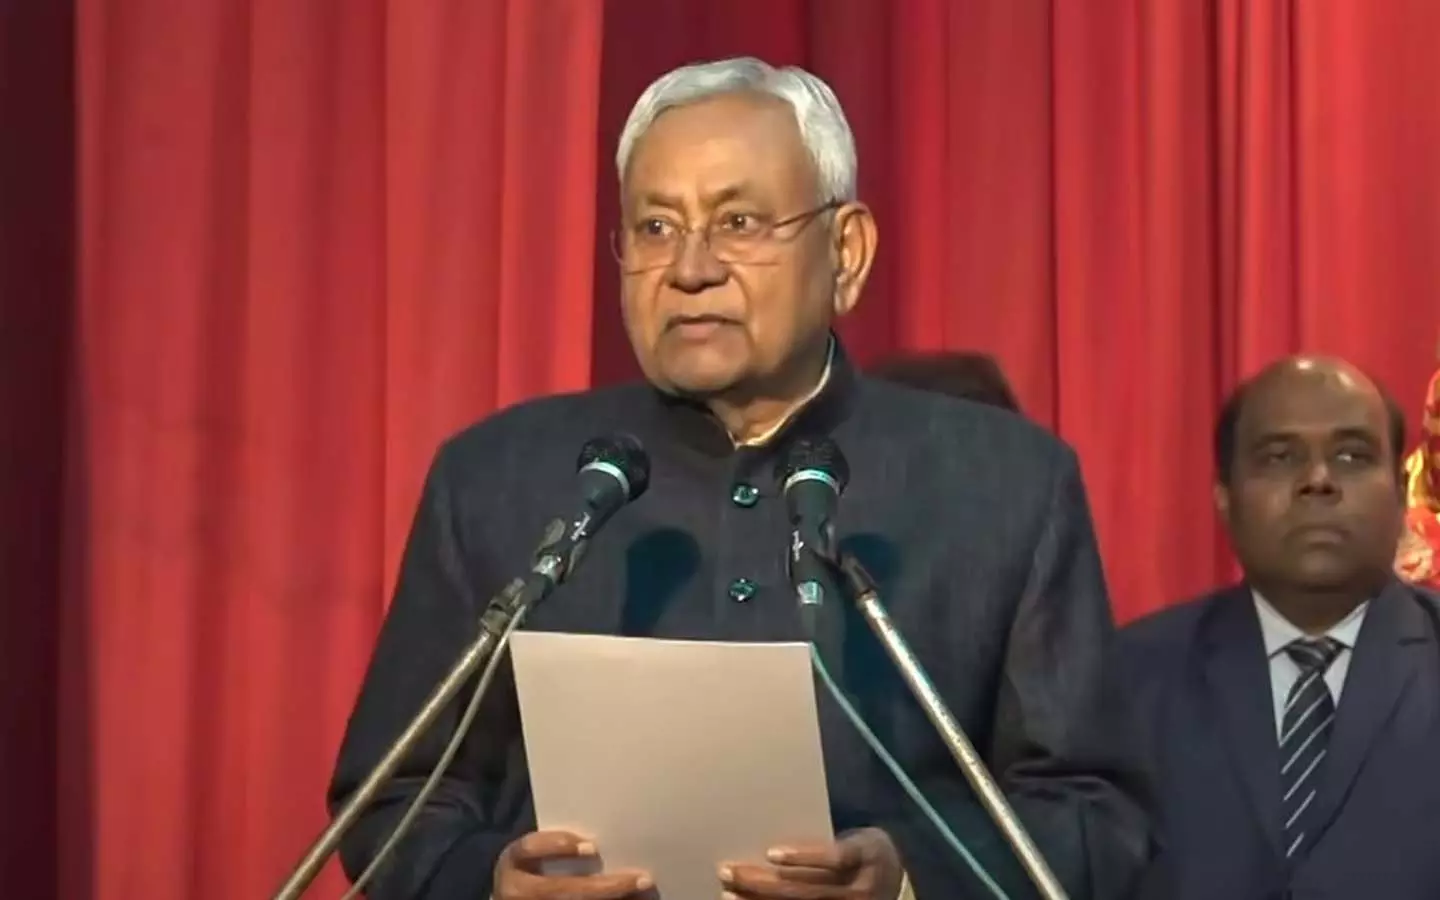 Nitish took oath as Chief Minister for the 9th time, Samrat Chaudhary and Vijay Sinha became Deputy CMs.